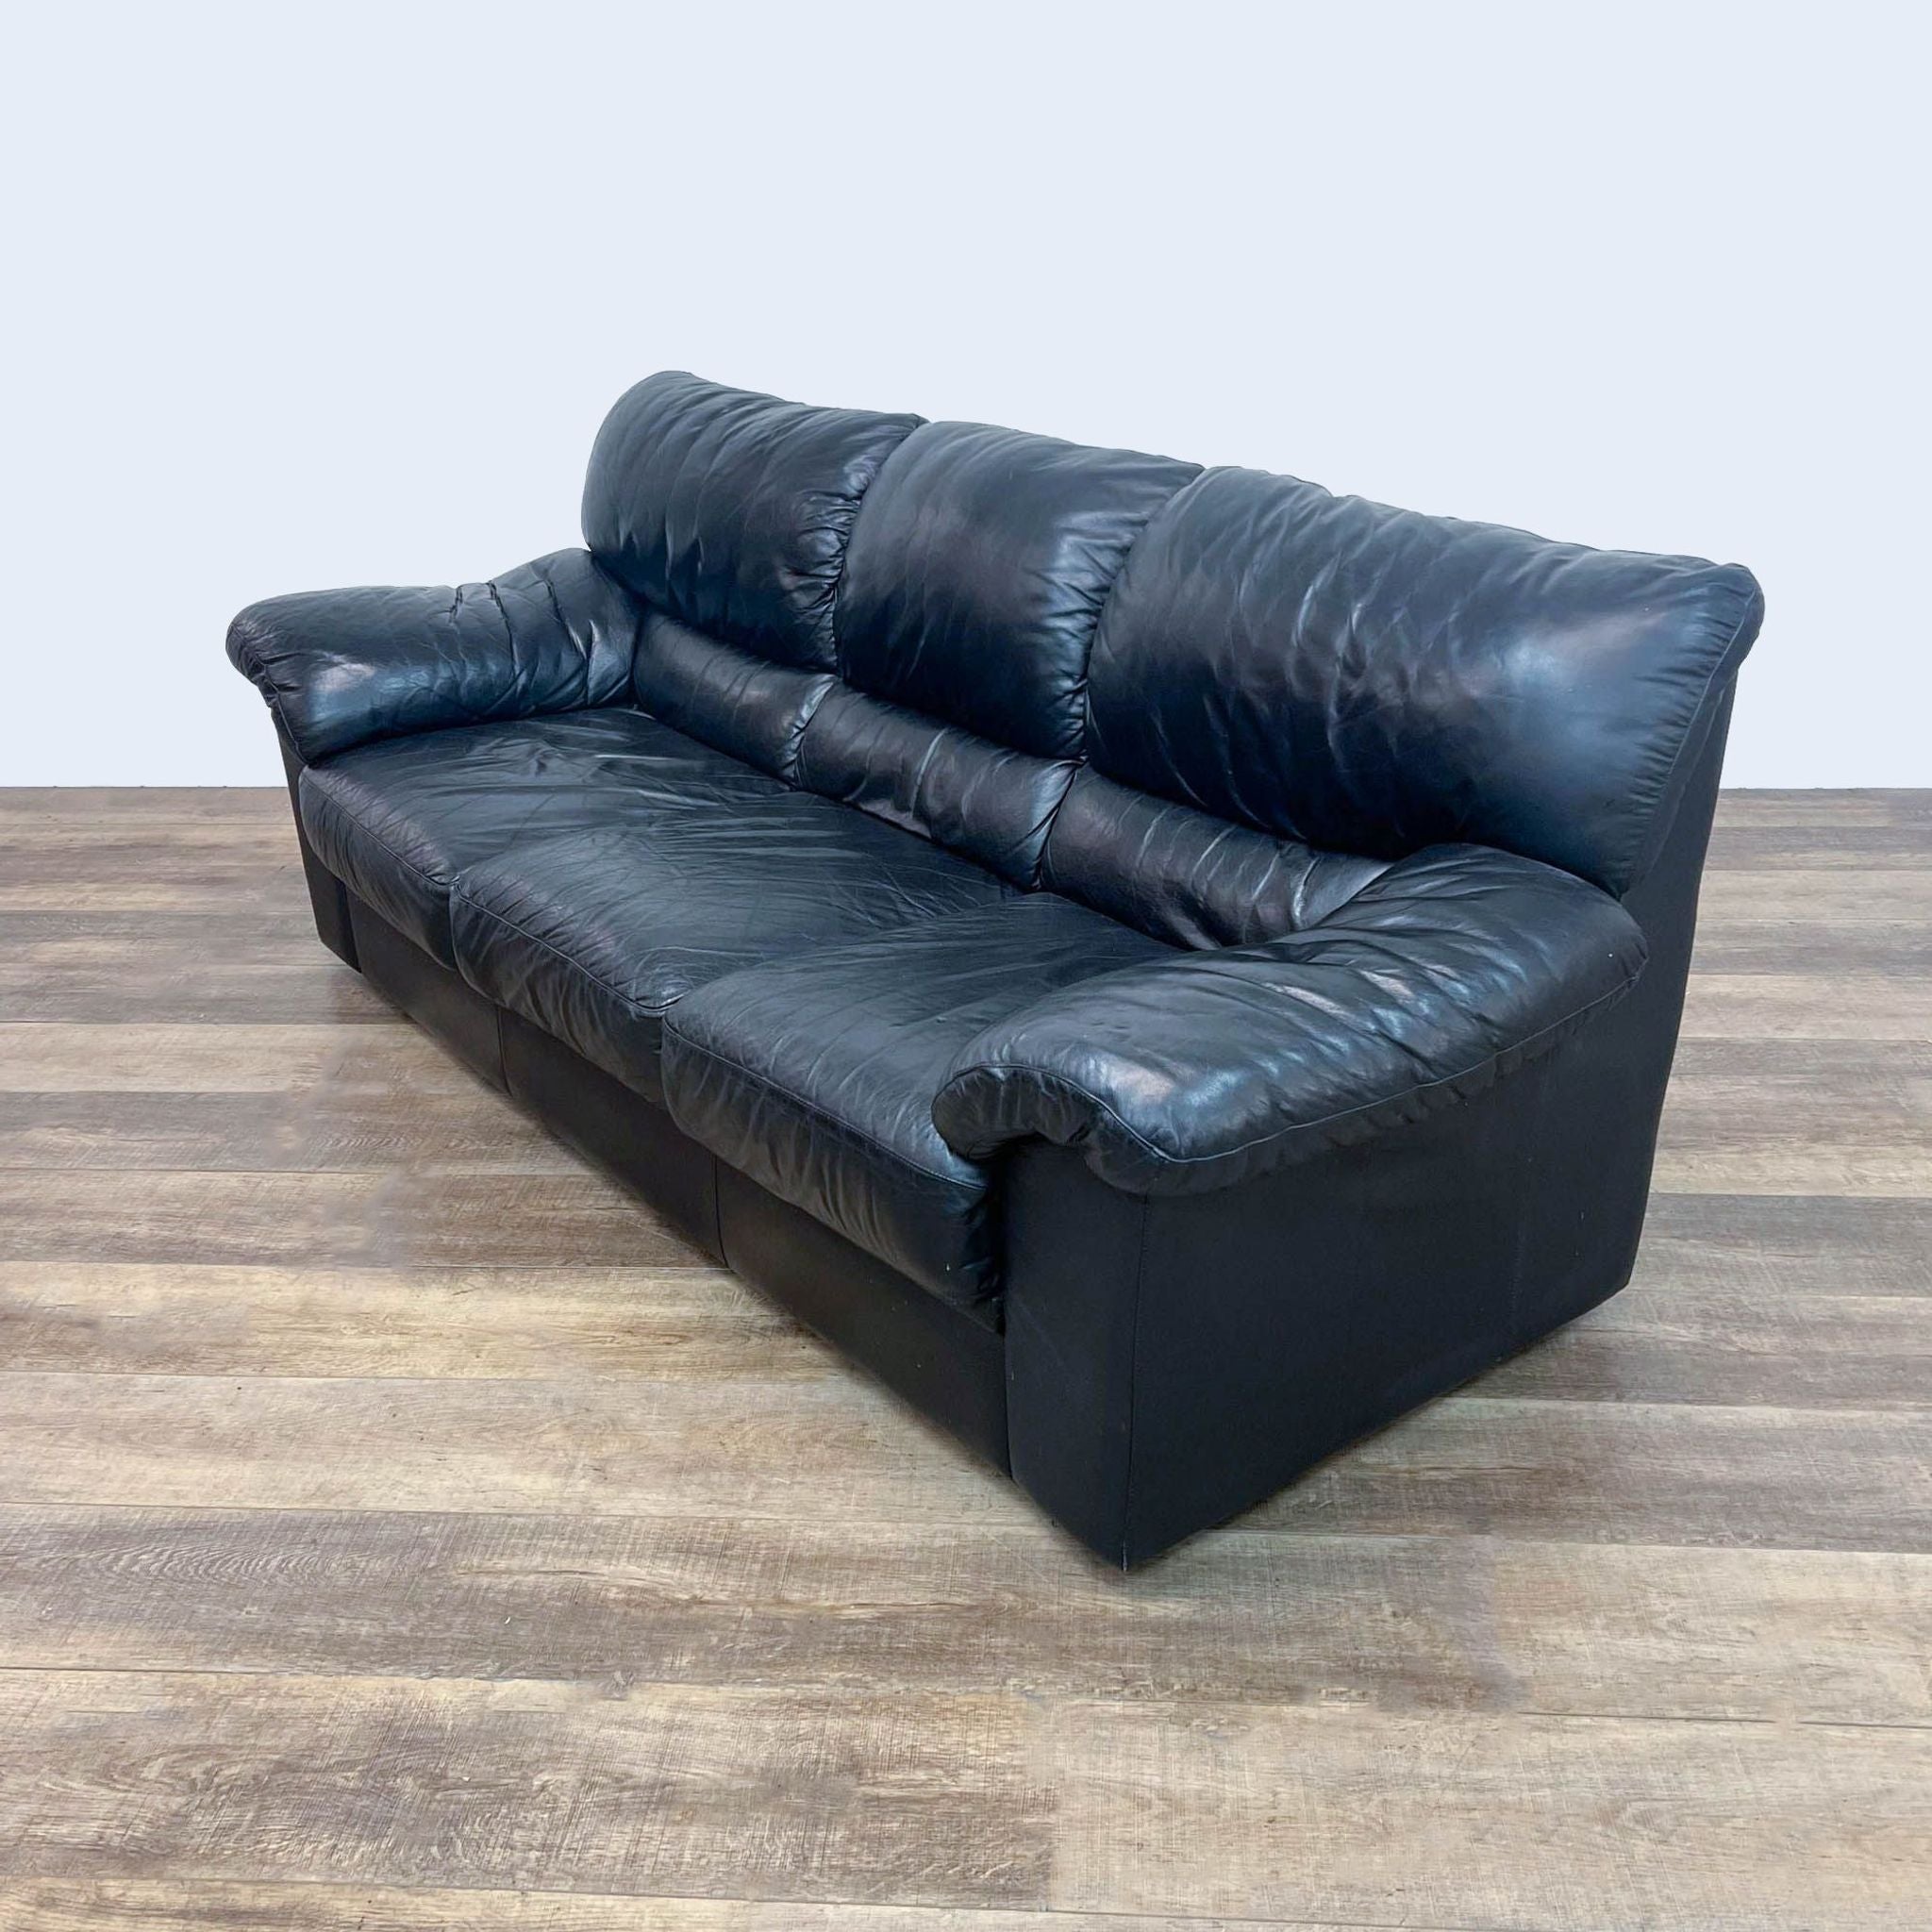 Contemporary Reperch leather sofa, featuring a 3-seat design with high back and cushioned arms, set against a neutral backdrop.